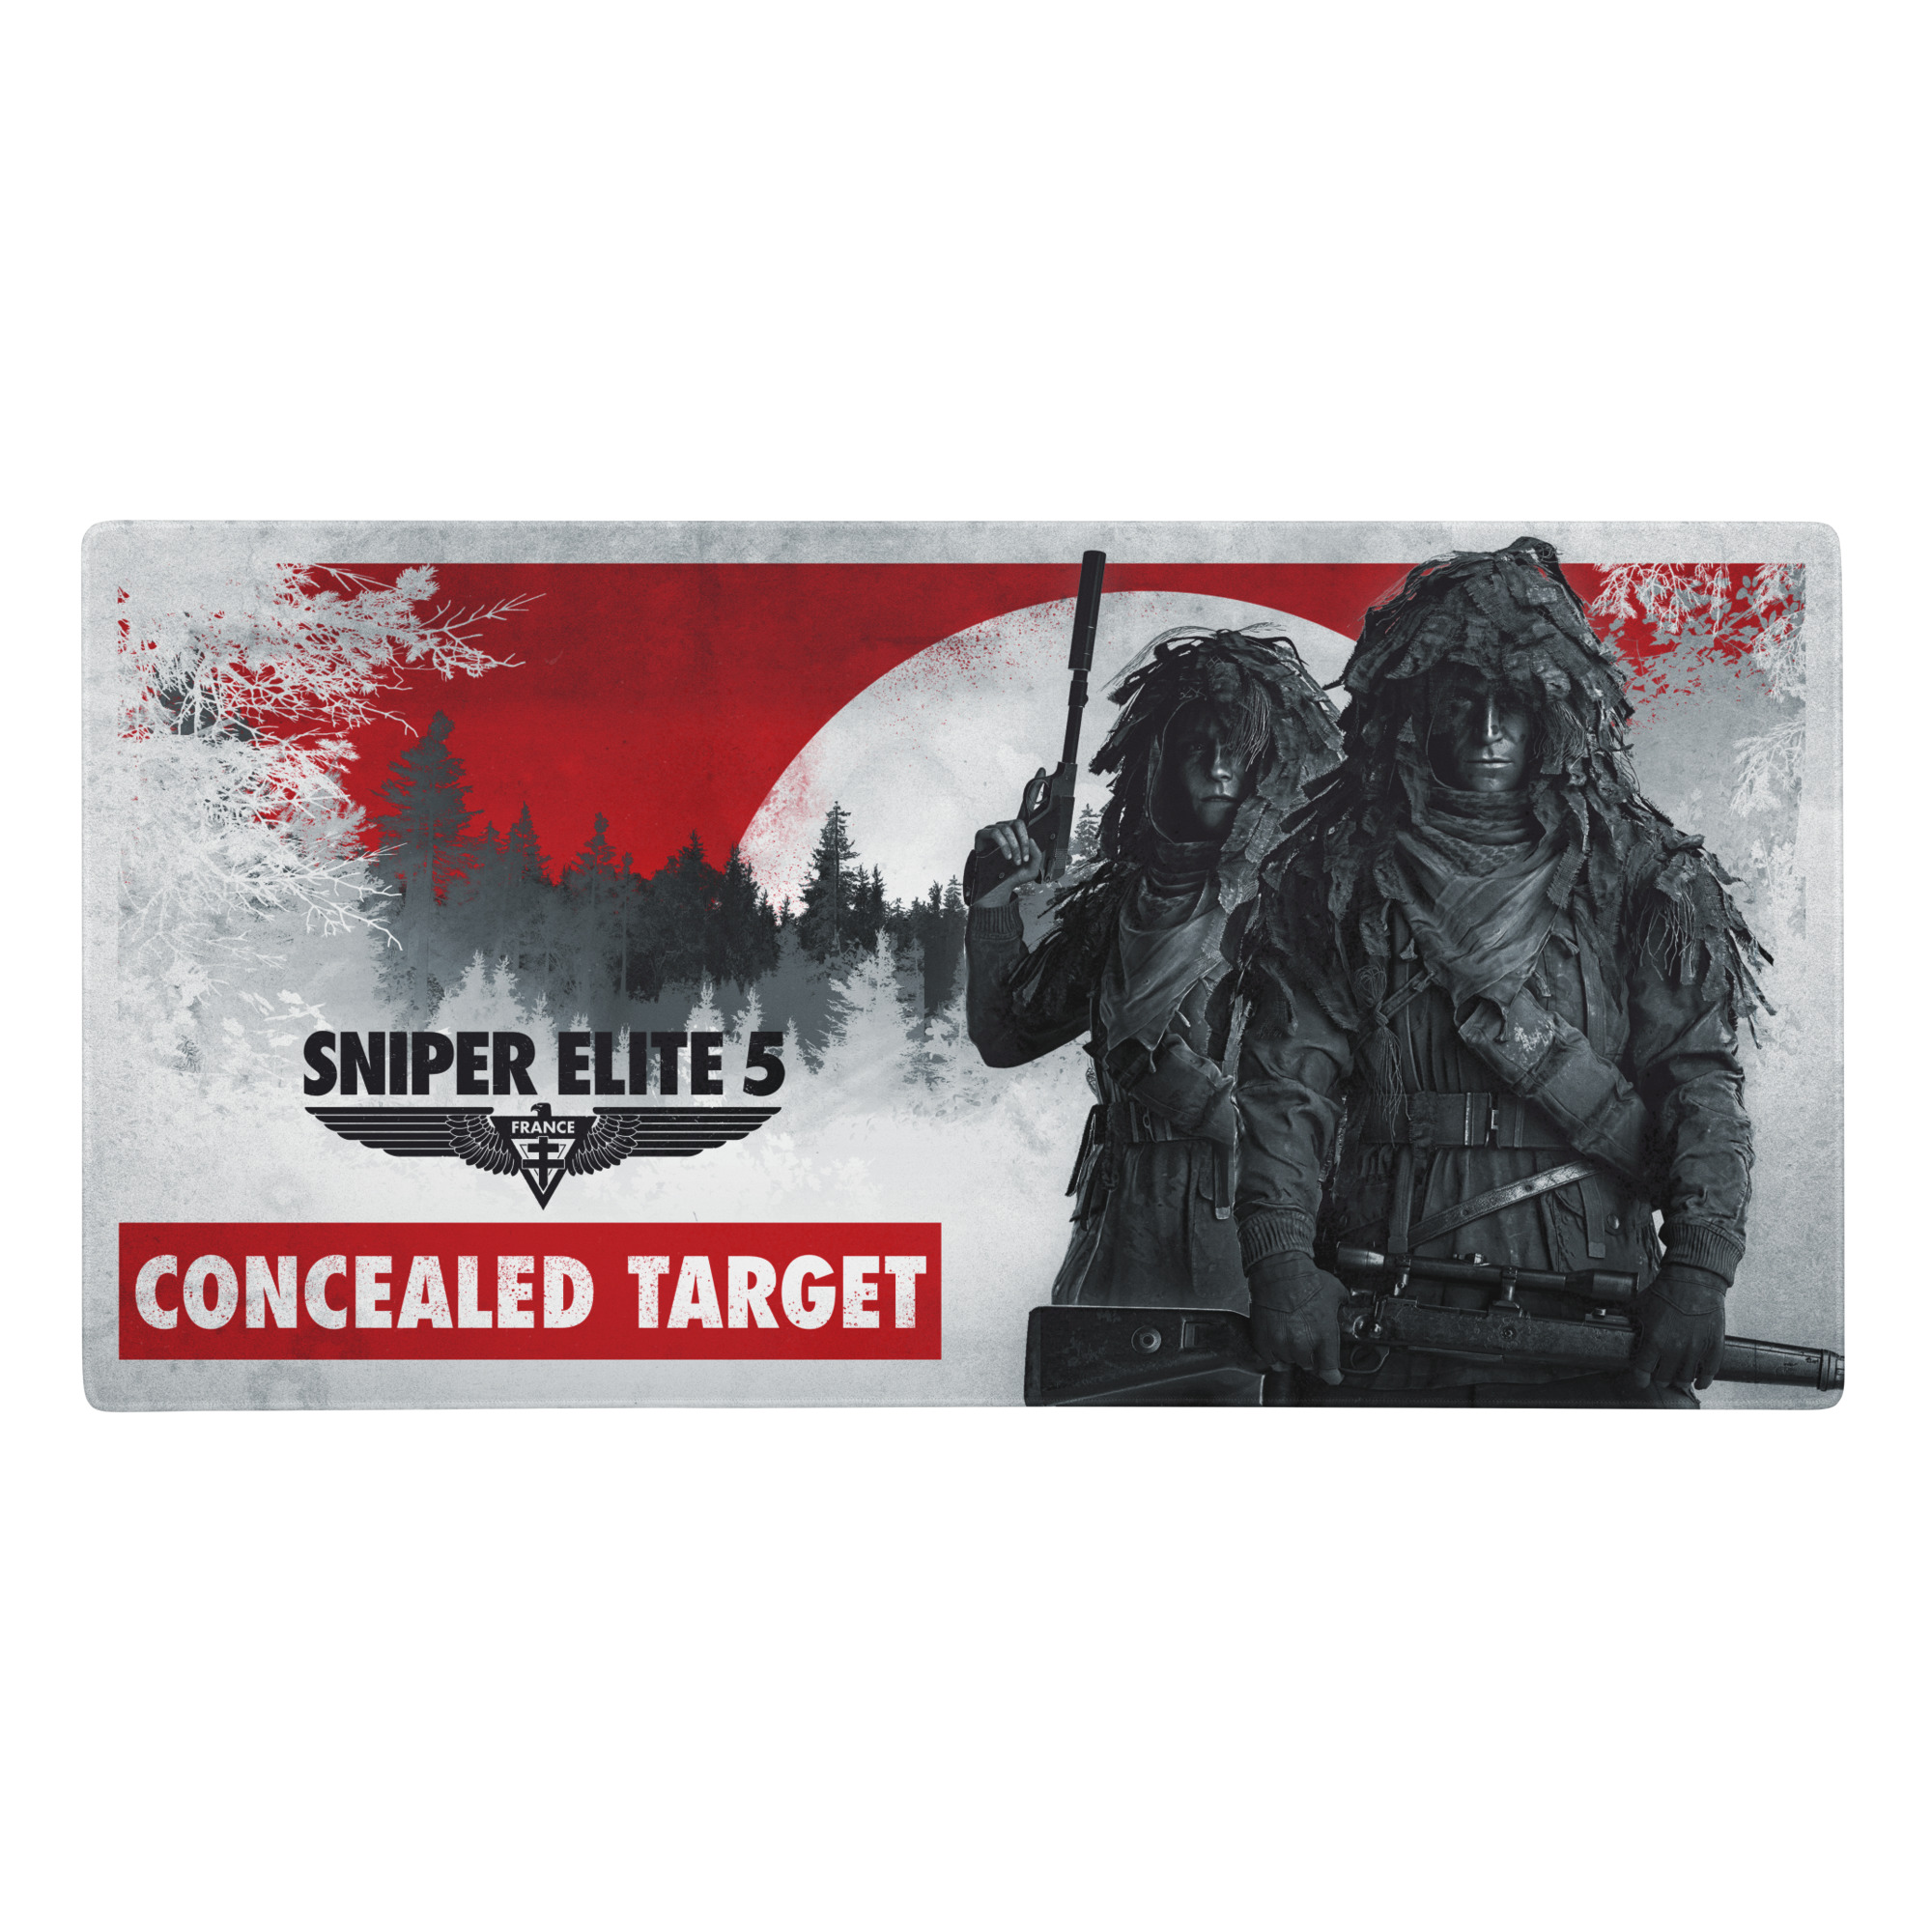 Image of a 36 inch by 18 inch gaming mouse mat featuring artwork from 